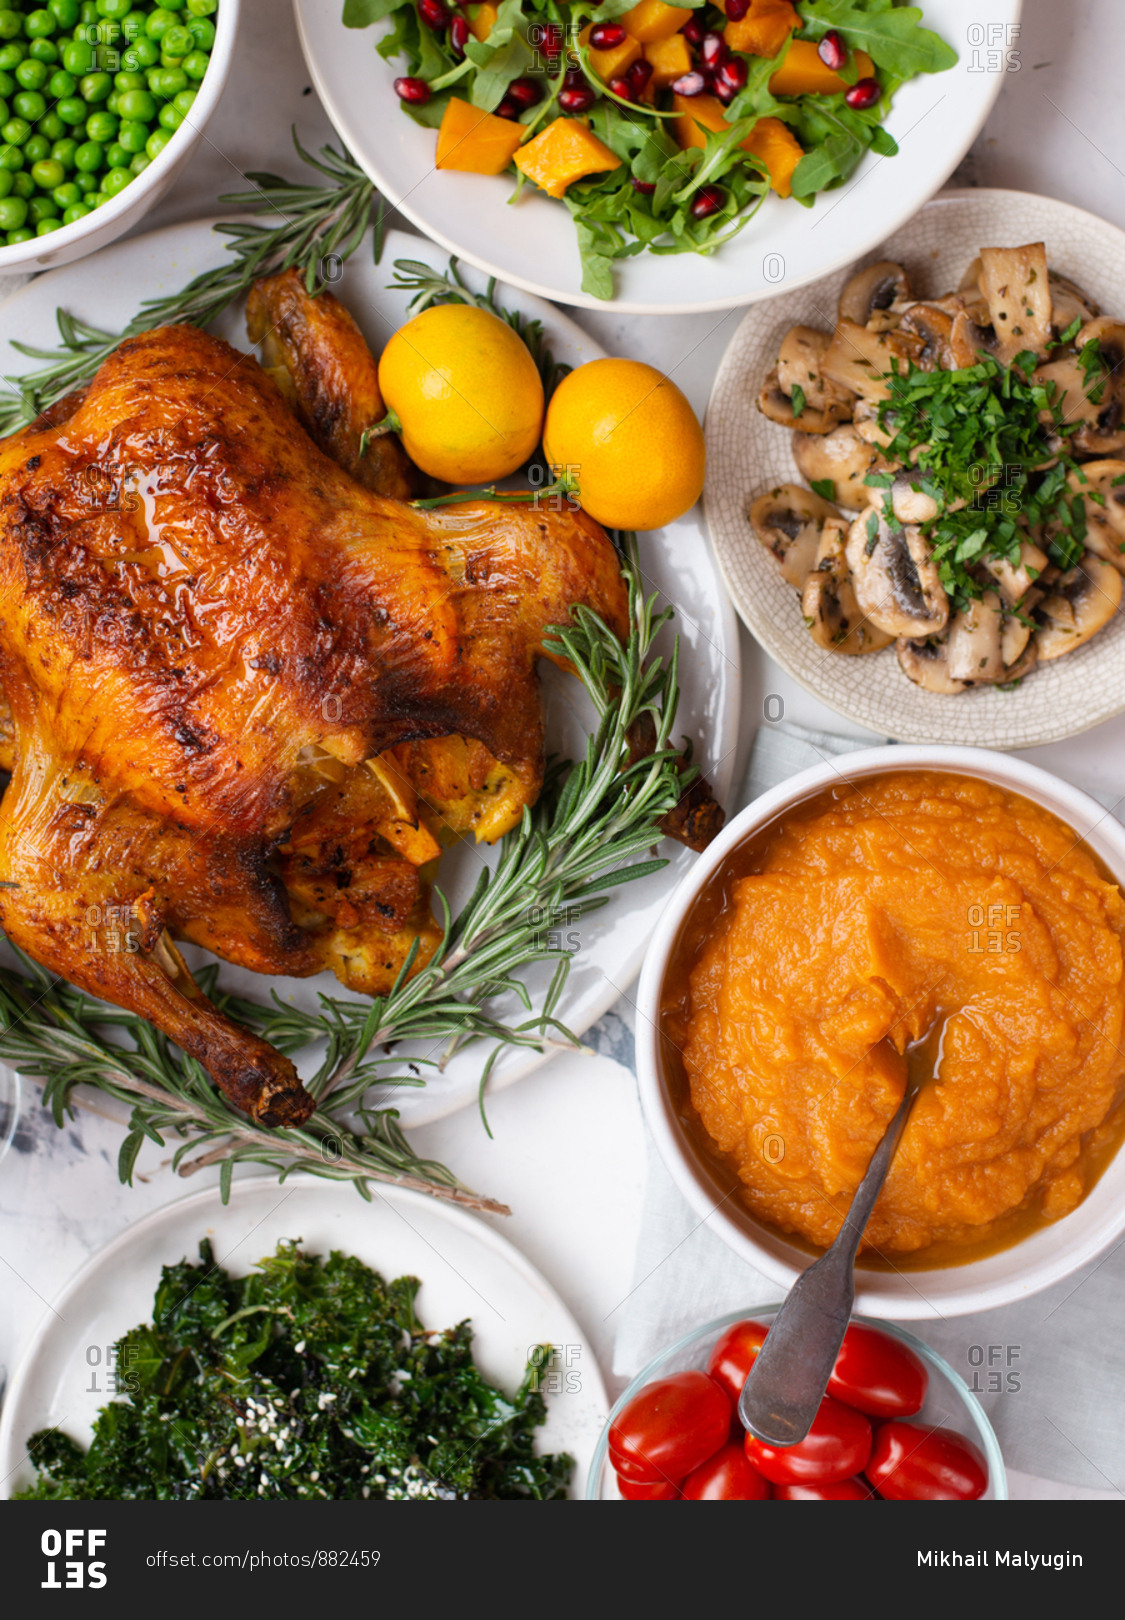 Thanksgiving dinner with roasted chicken and sides